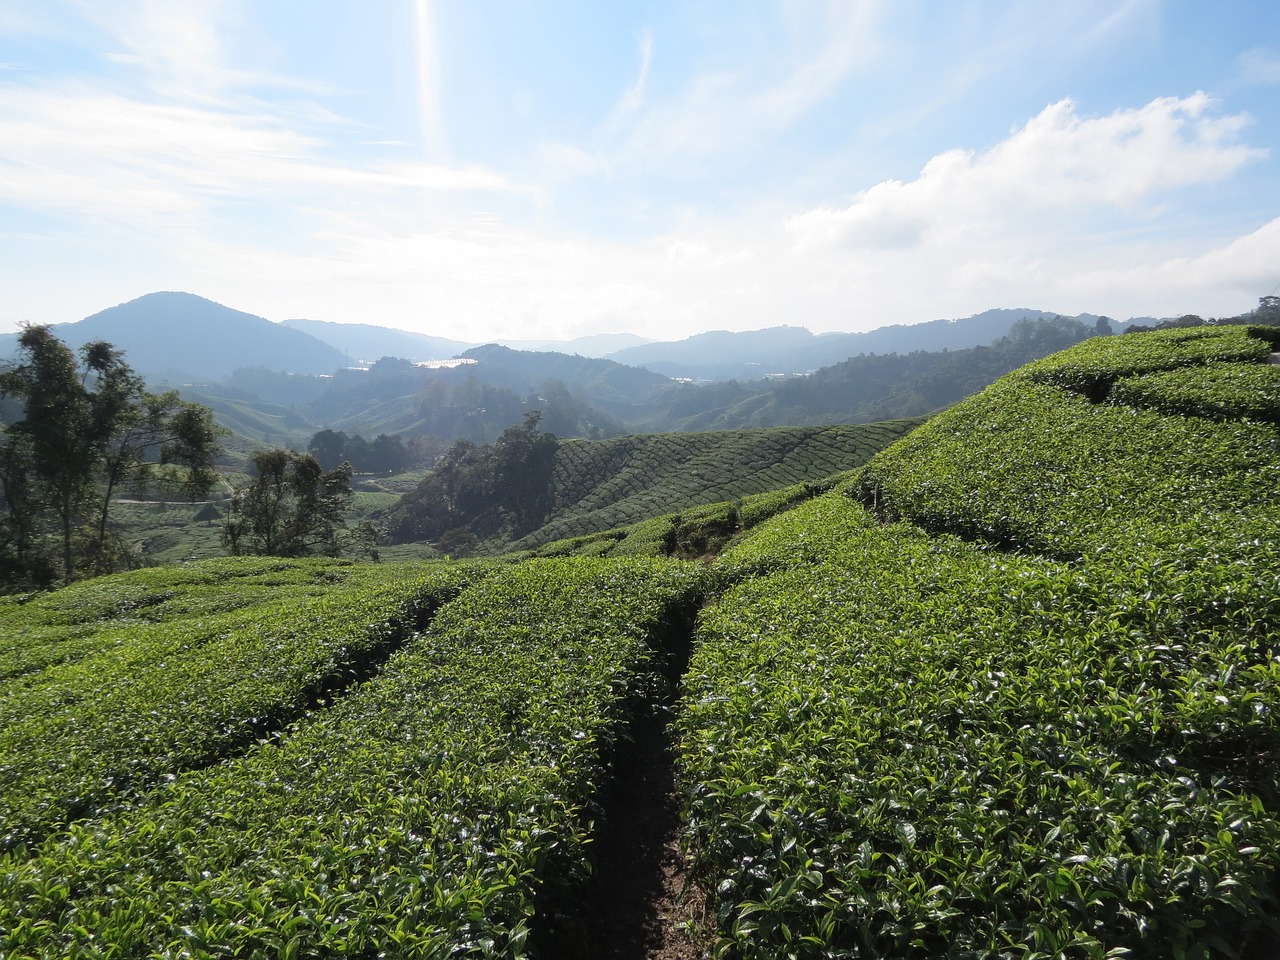 2 Days Exploring Cameron Highlands with a Focus on Flower Gardens and Scenic Viewpoints